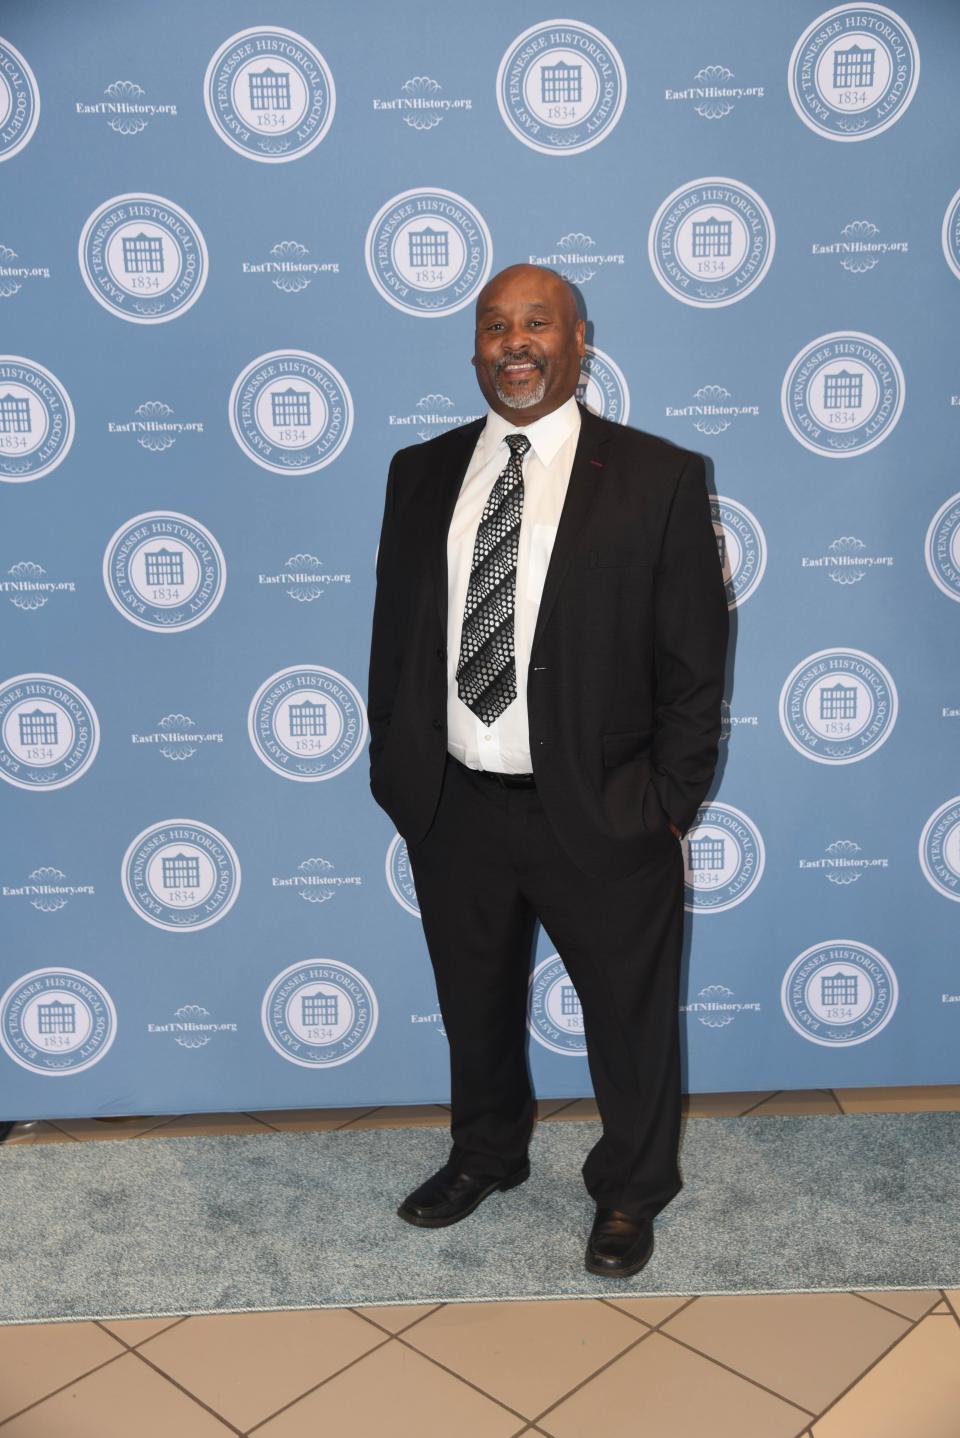 John Spratling was the recipient of a Teaching Excellence Award for preserving and interpreting Black history in East Tennessee through community education, specifically through his role as a history teacher at Robertsville Middle School and his work to highlight the legacy of the 'Scarboro 85.'